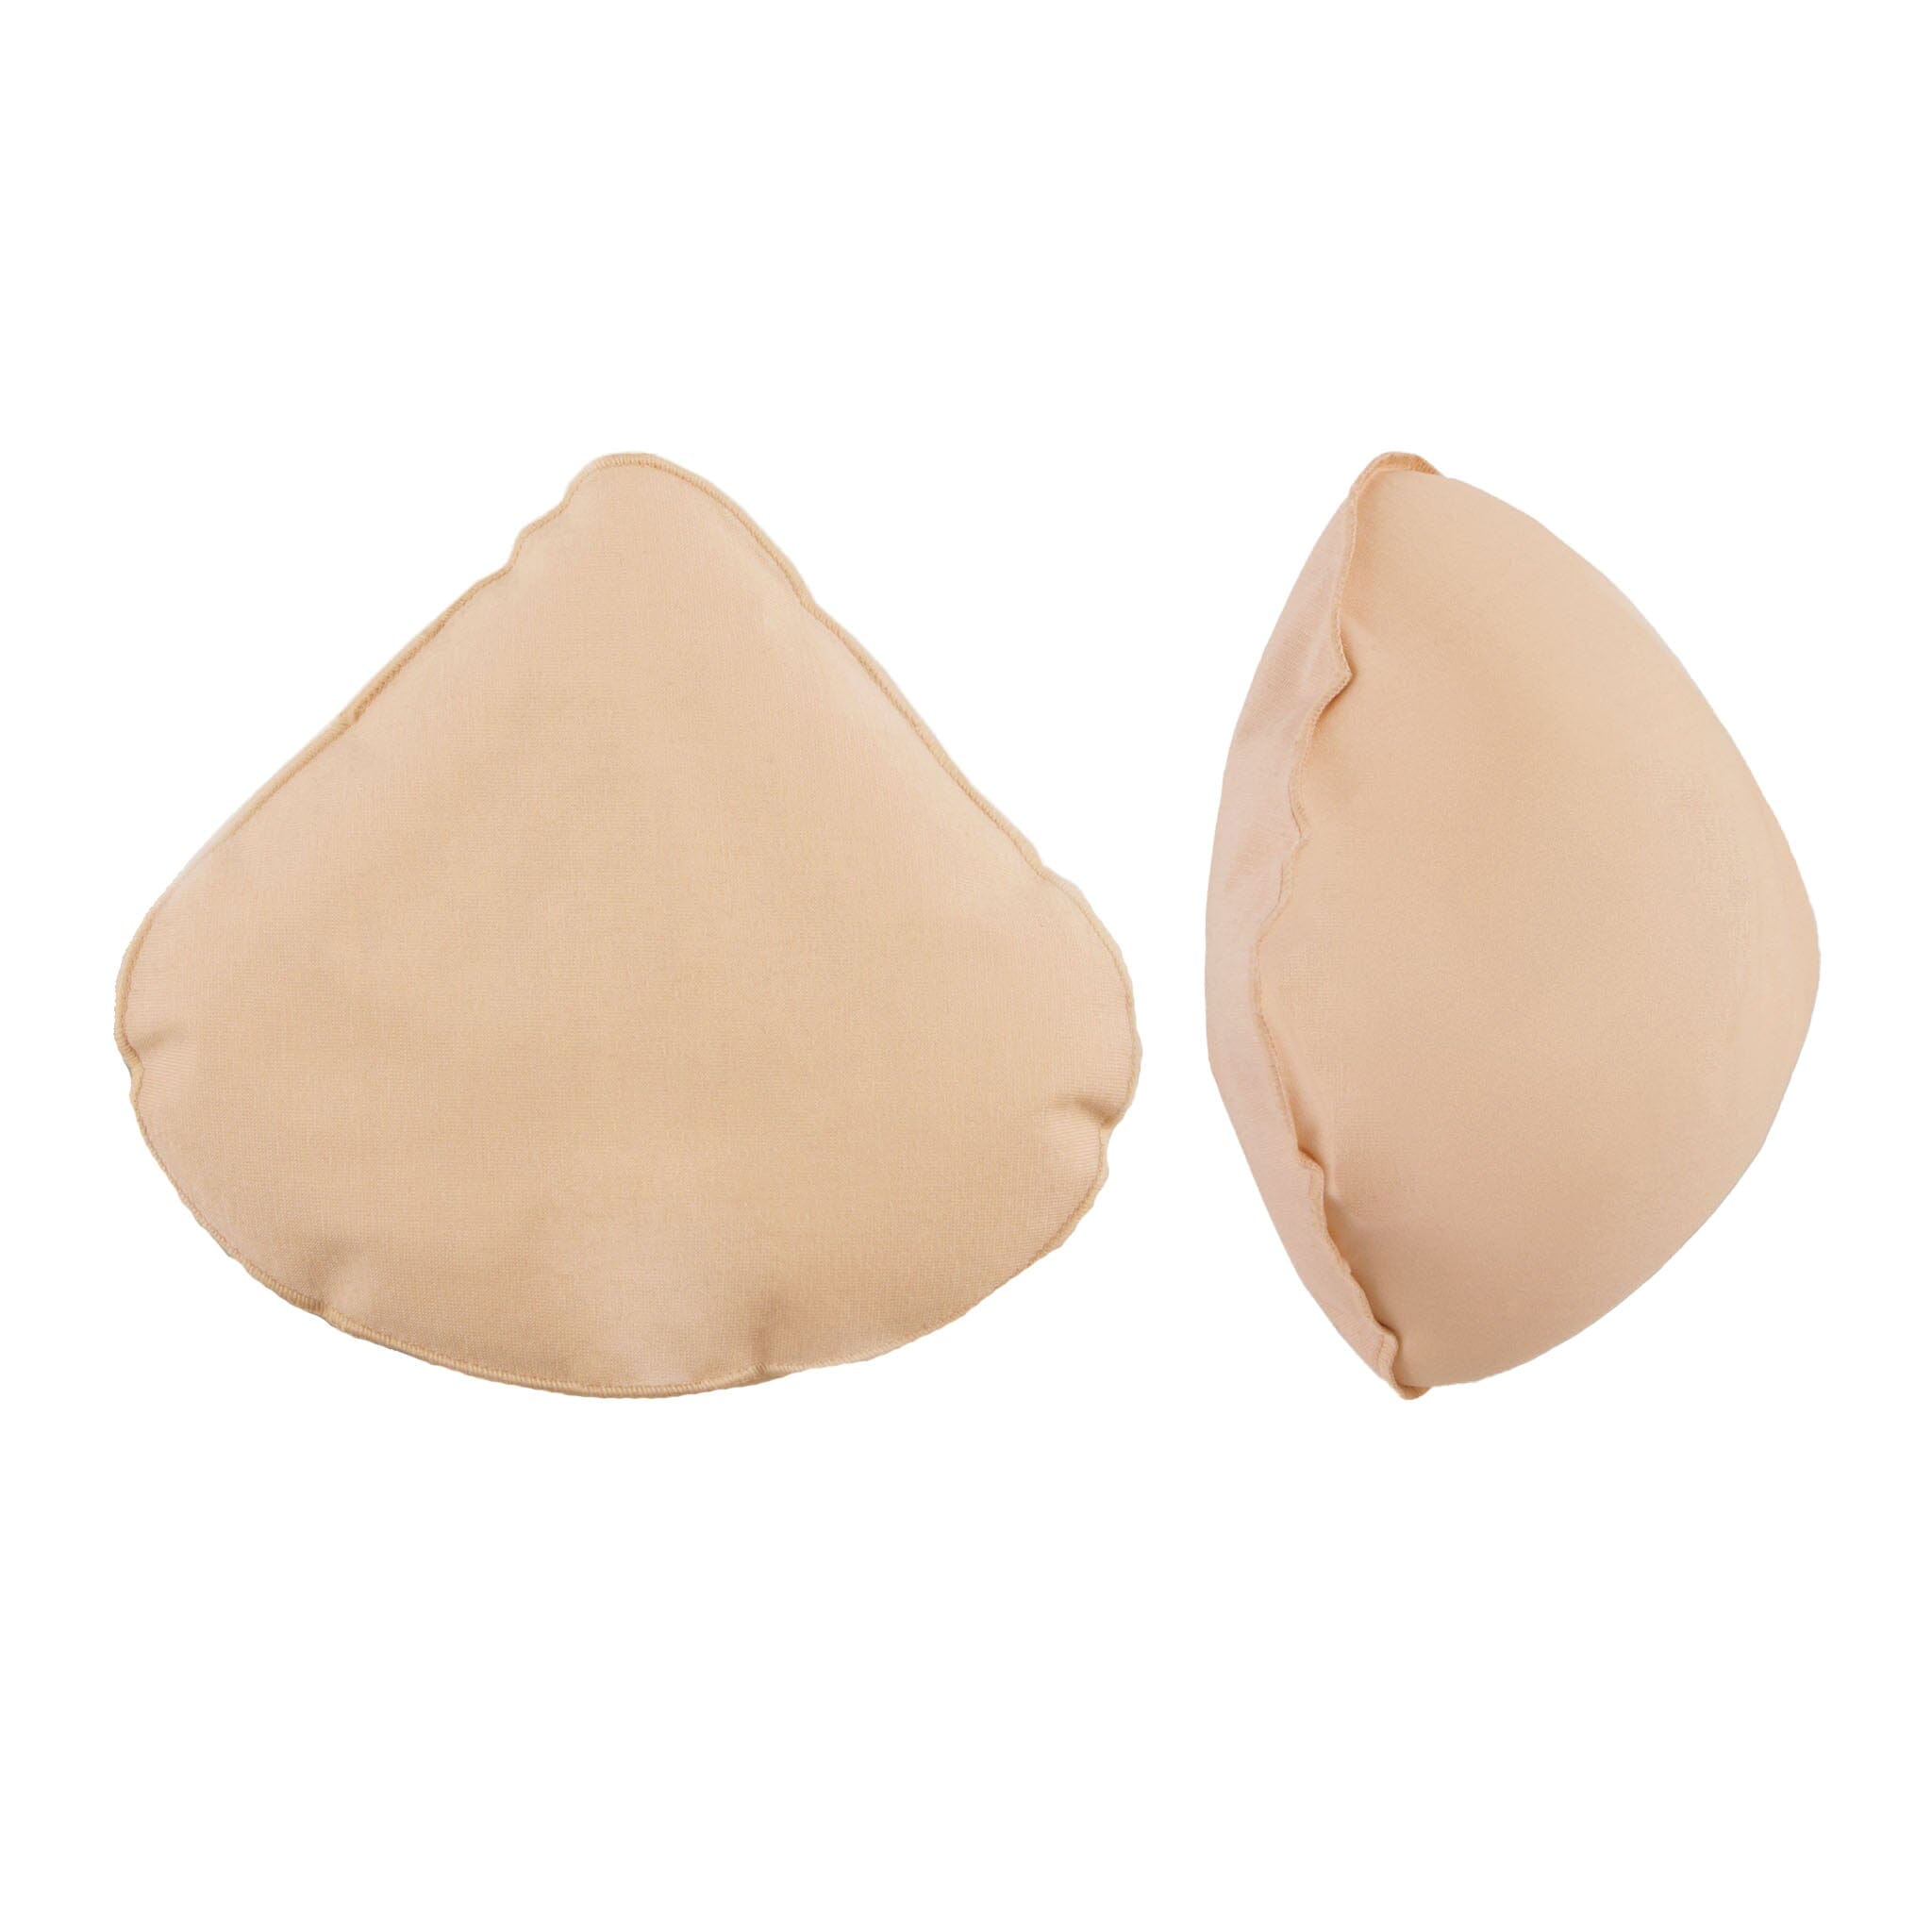 Mastectomy Prosthesis Breast Forms for Sale